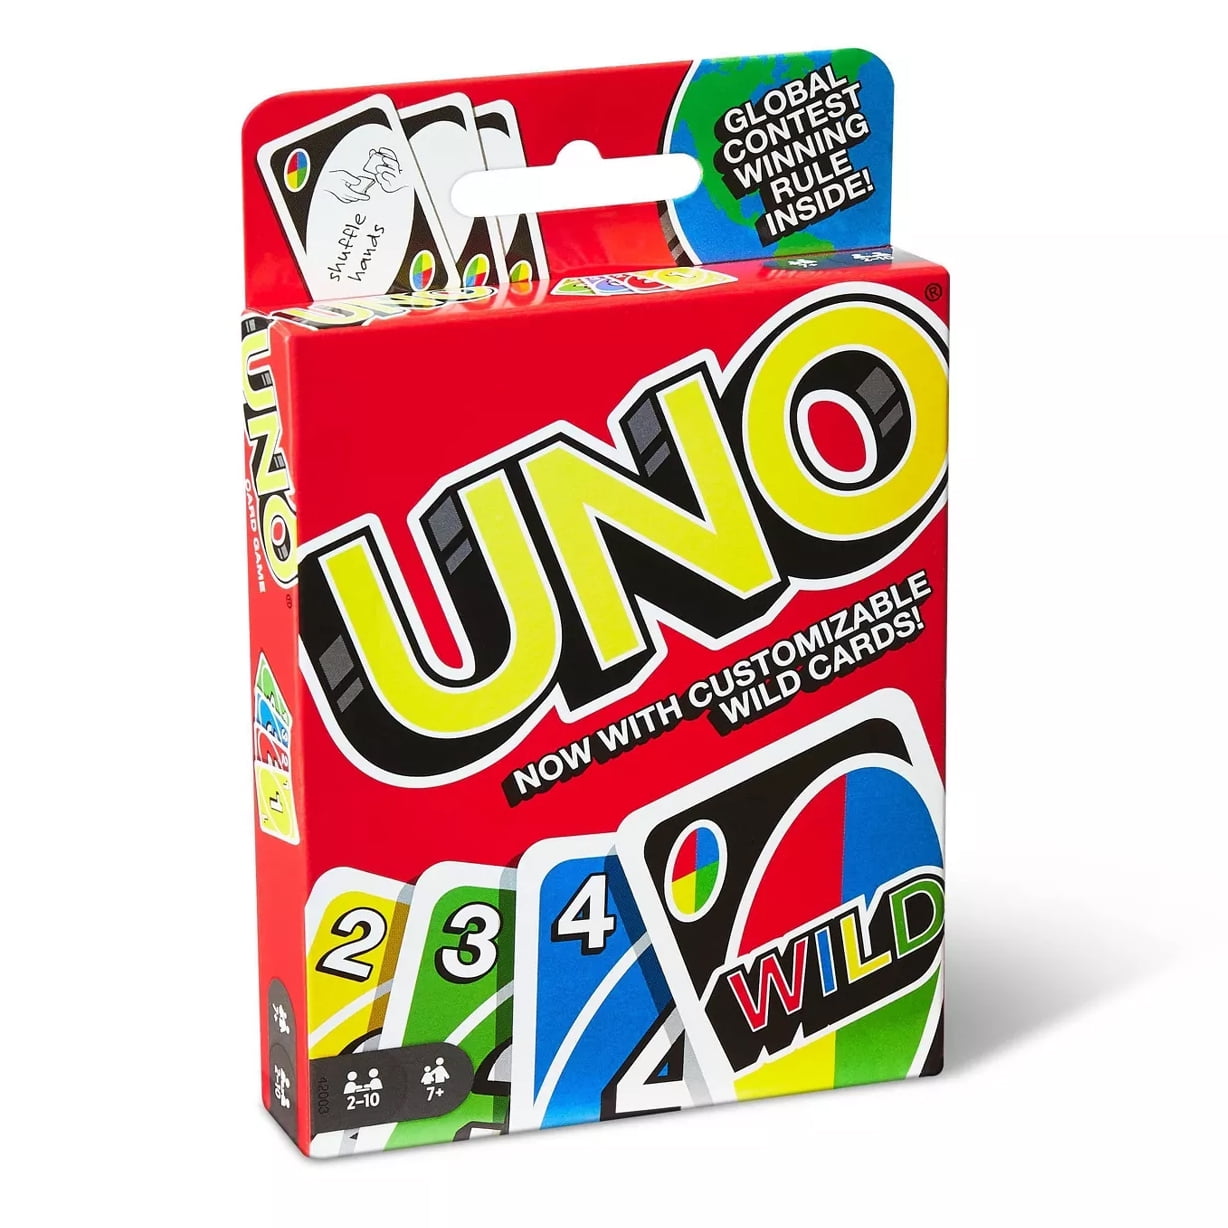 Uno Card Game Classic  Fun Family Play Cards Small Deck Wild Instructions Rules 